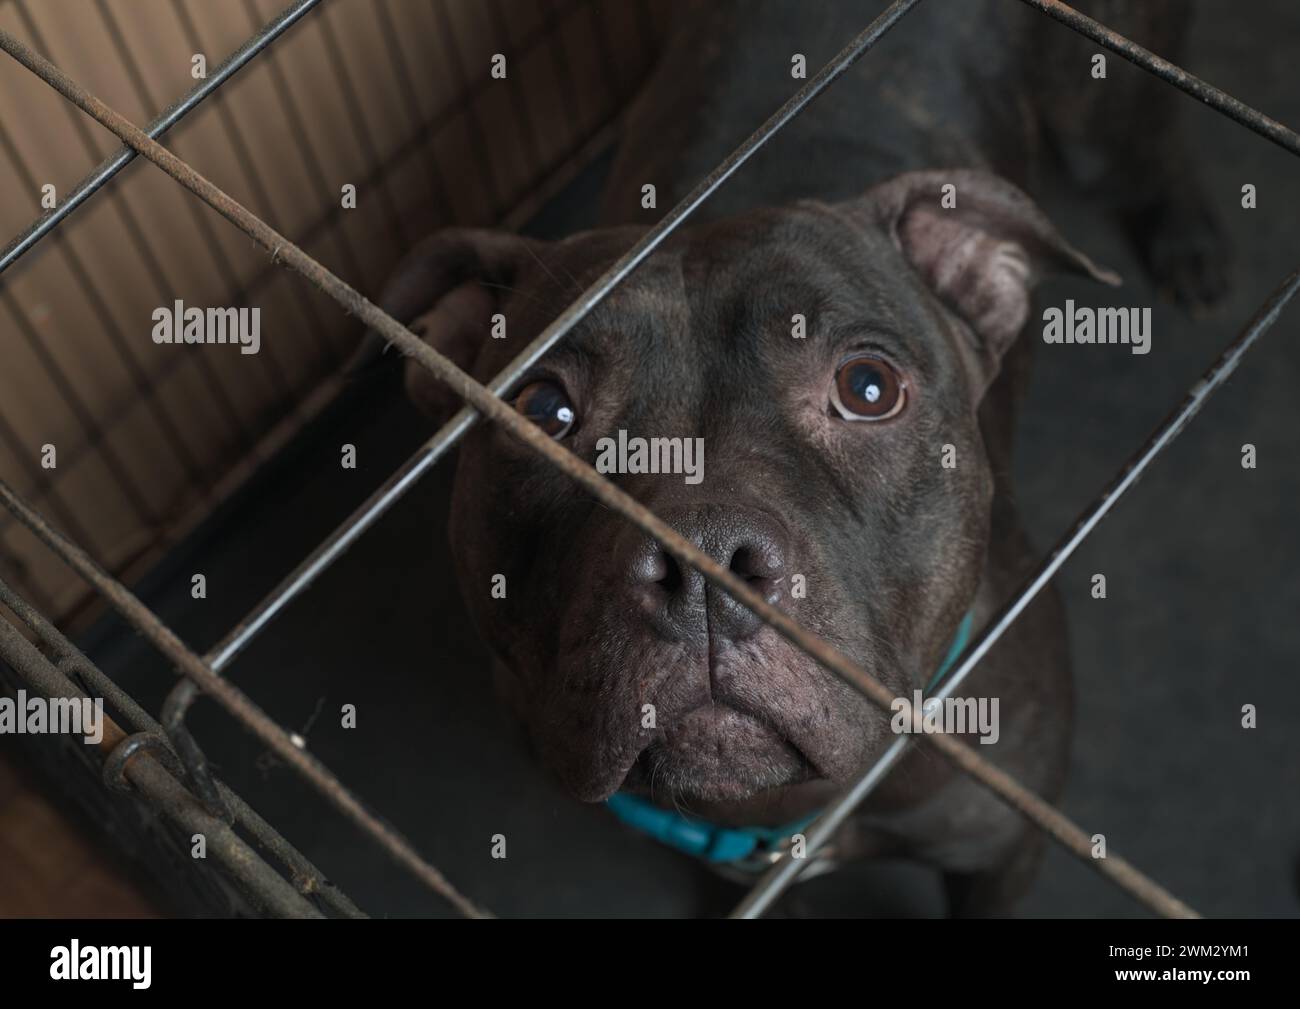 Resilience in confinement: A pit bull's strength shines through the bars. Break the chains, embrace compassion. ? #PitBullFreedom' Stock Photo